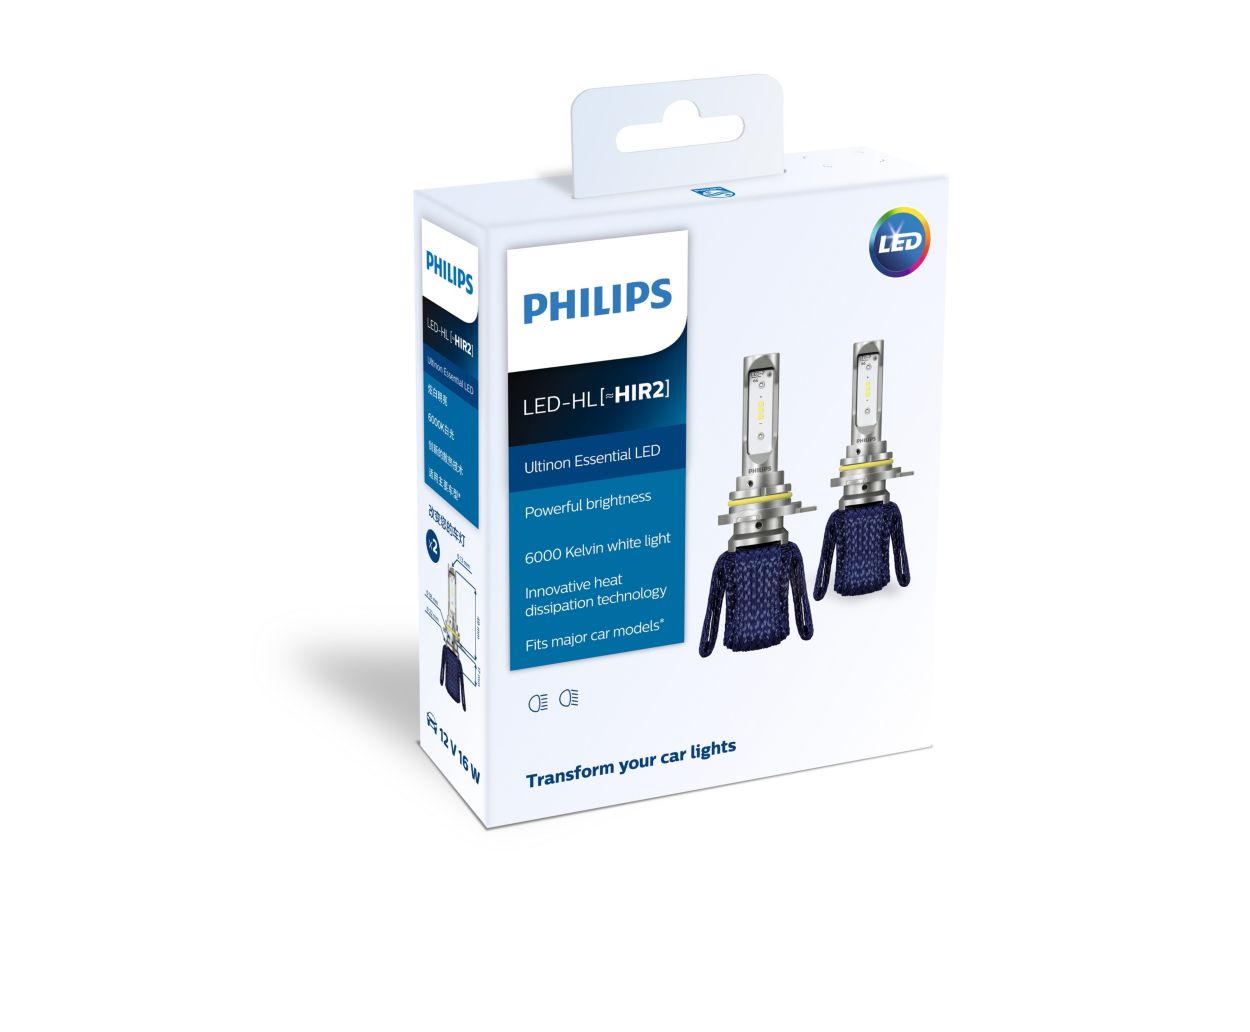 2x Ampoules LED HIR2 PHILIPS Ultinon Access 6000K - Plug and Play